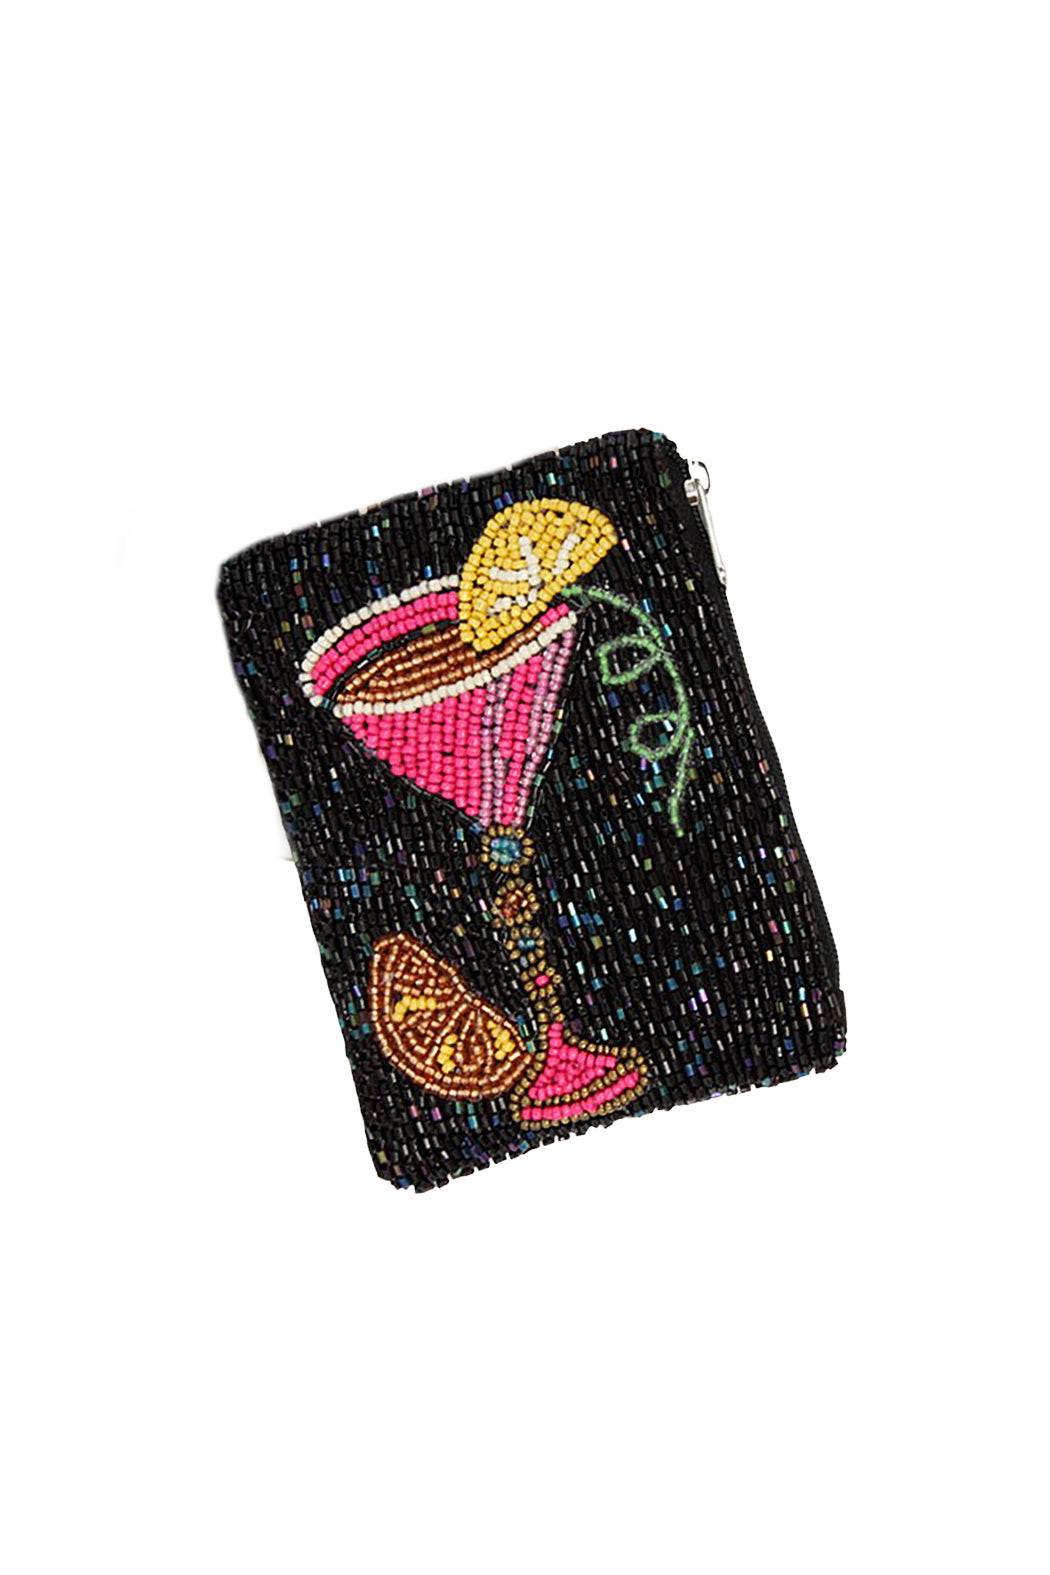 Martini Beaded Pouch